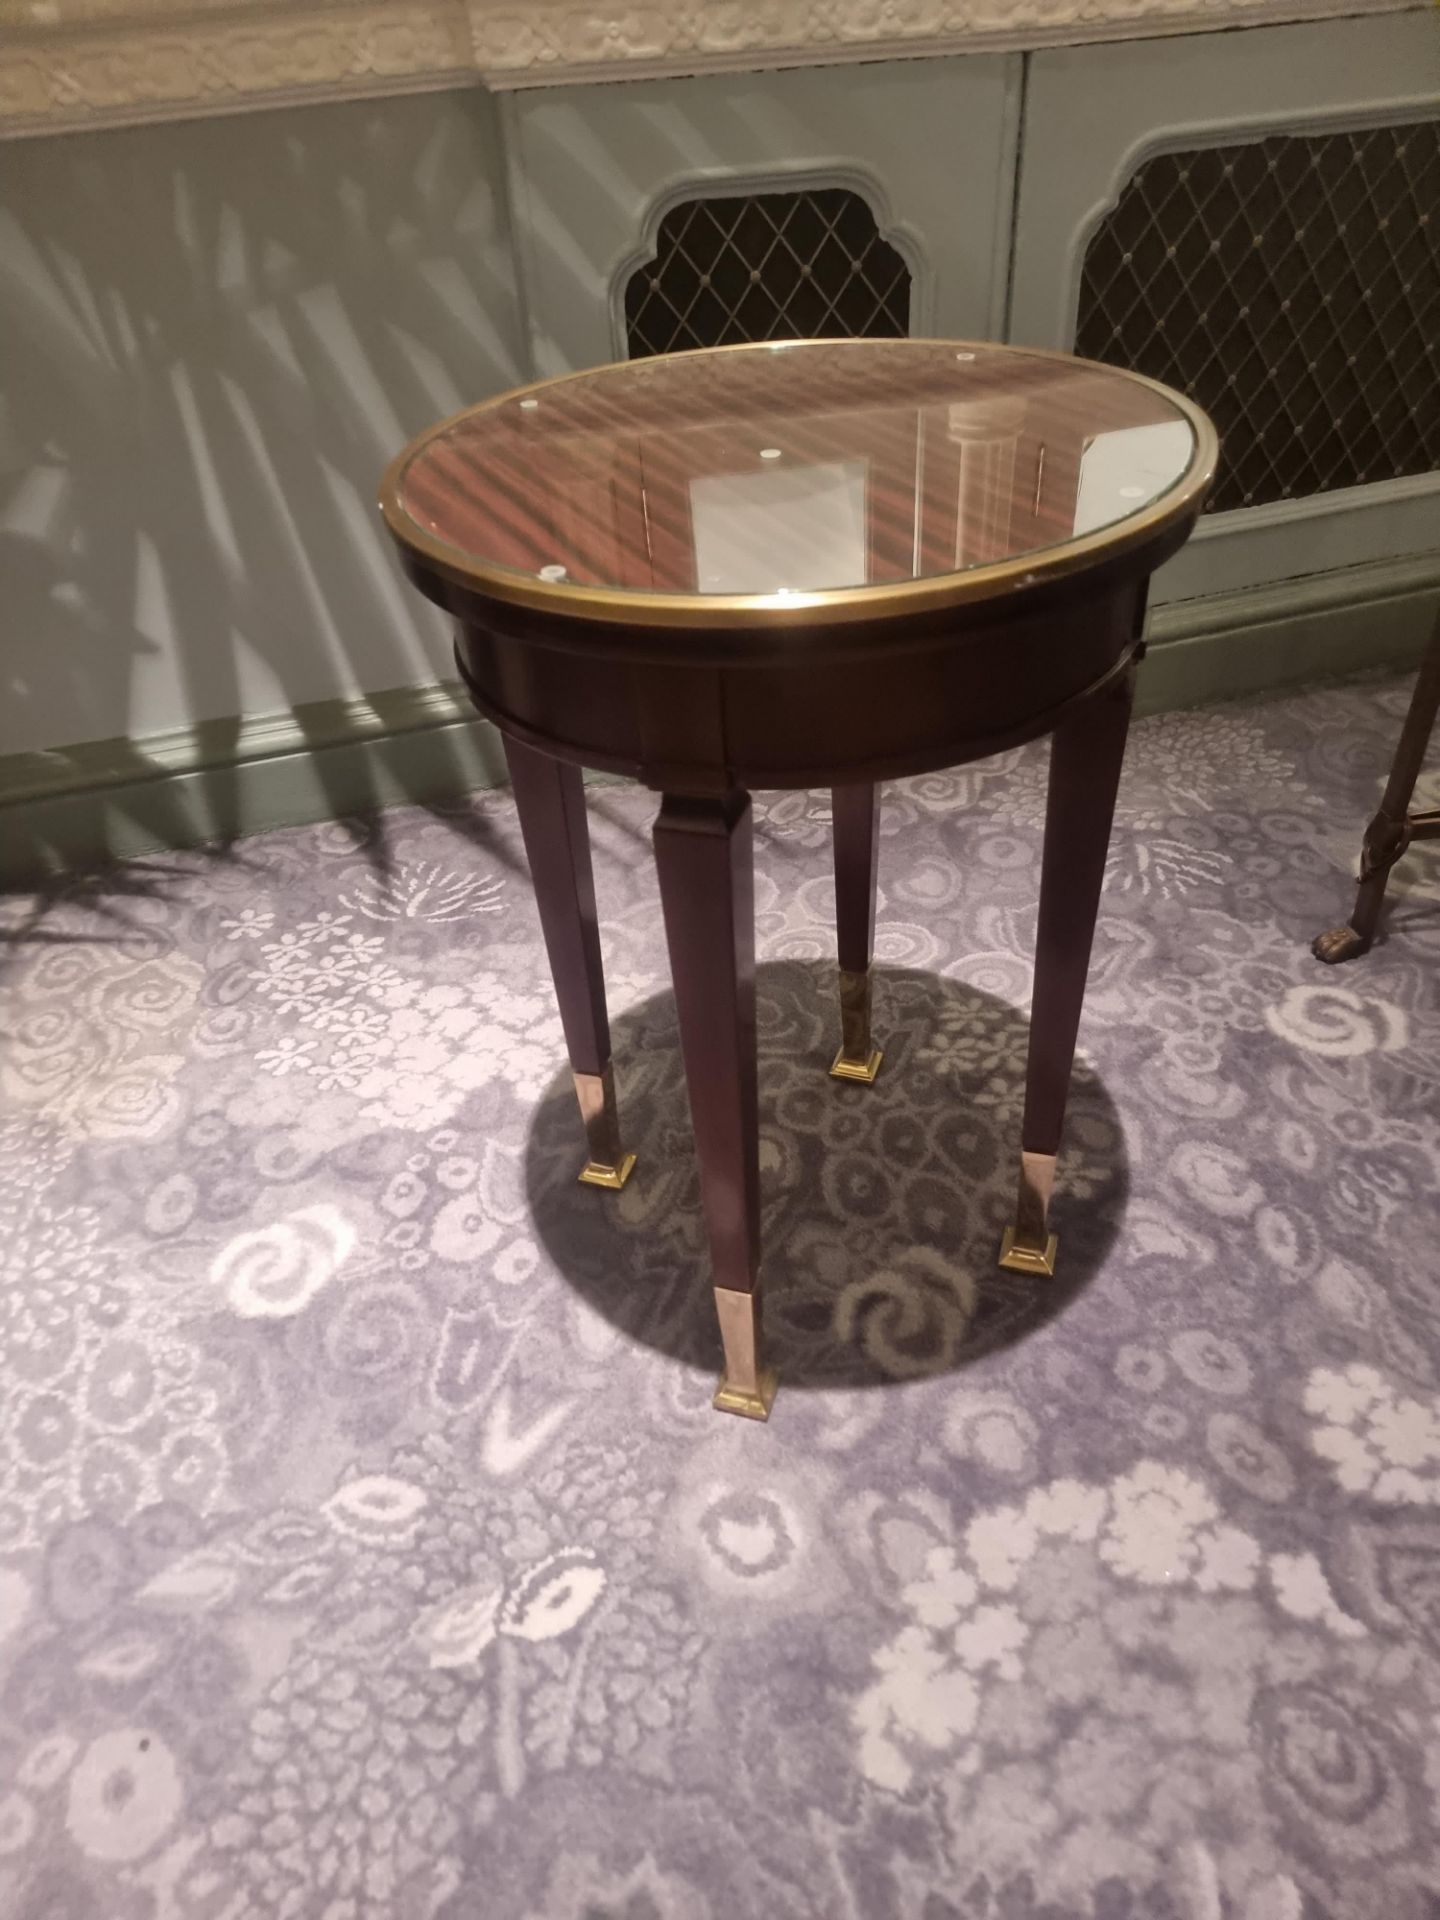 Circular Side Table Macassar Ebony With Glass Plate Top And Brass Trim Mounted On Tapering Legs With - Image 4 of 5